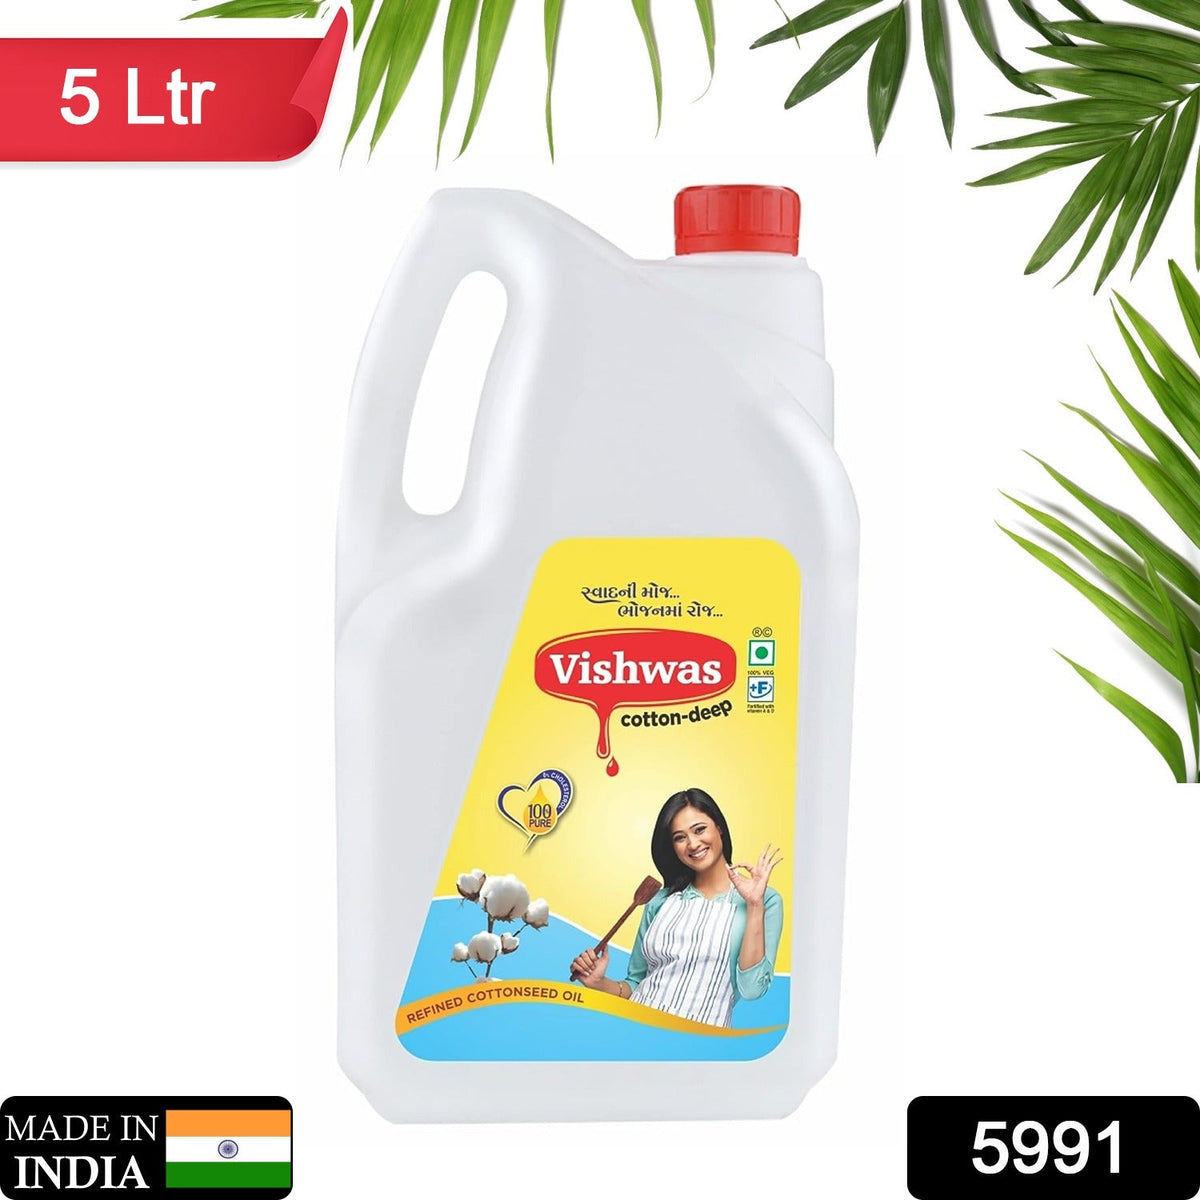 5991 Vishwas Cottonseed Oil for Cooking | Refined Cotton Seed Oil 100% Pure & Healthy | Delicious & Tasty Cooking Oil | Cottonseed Cooking Oil